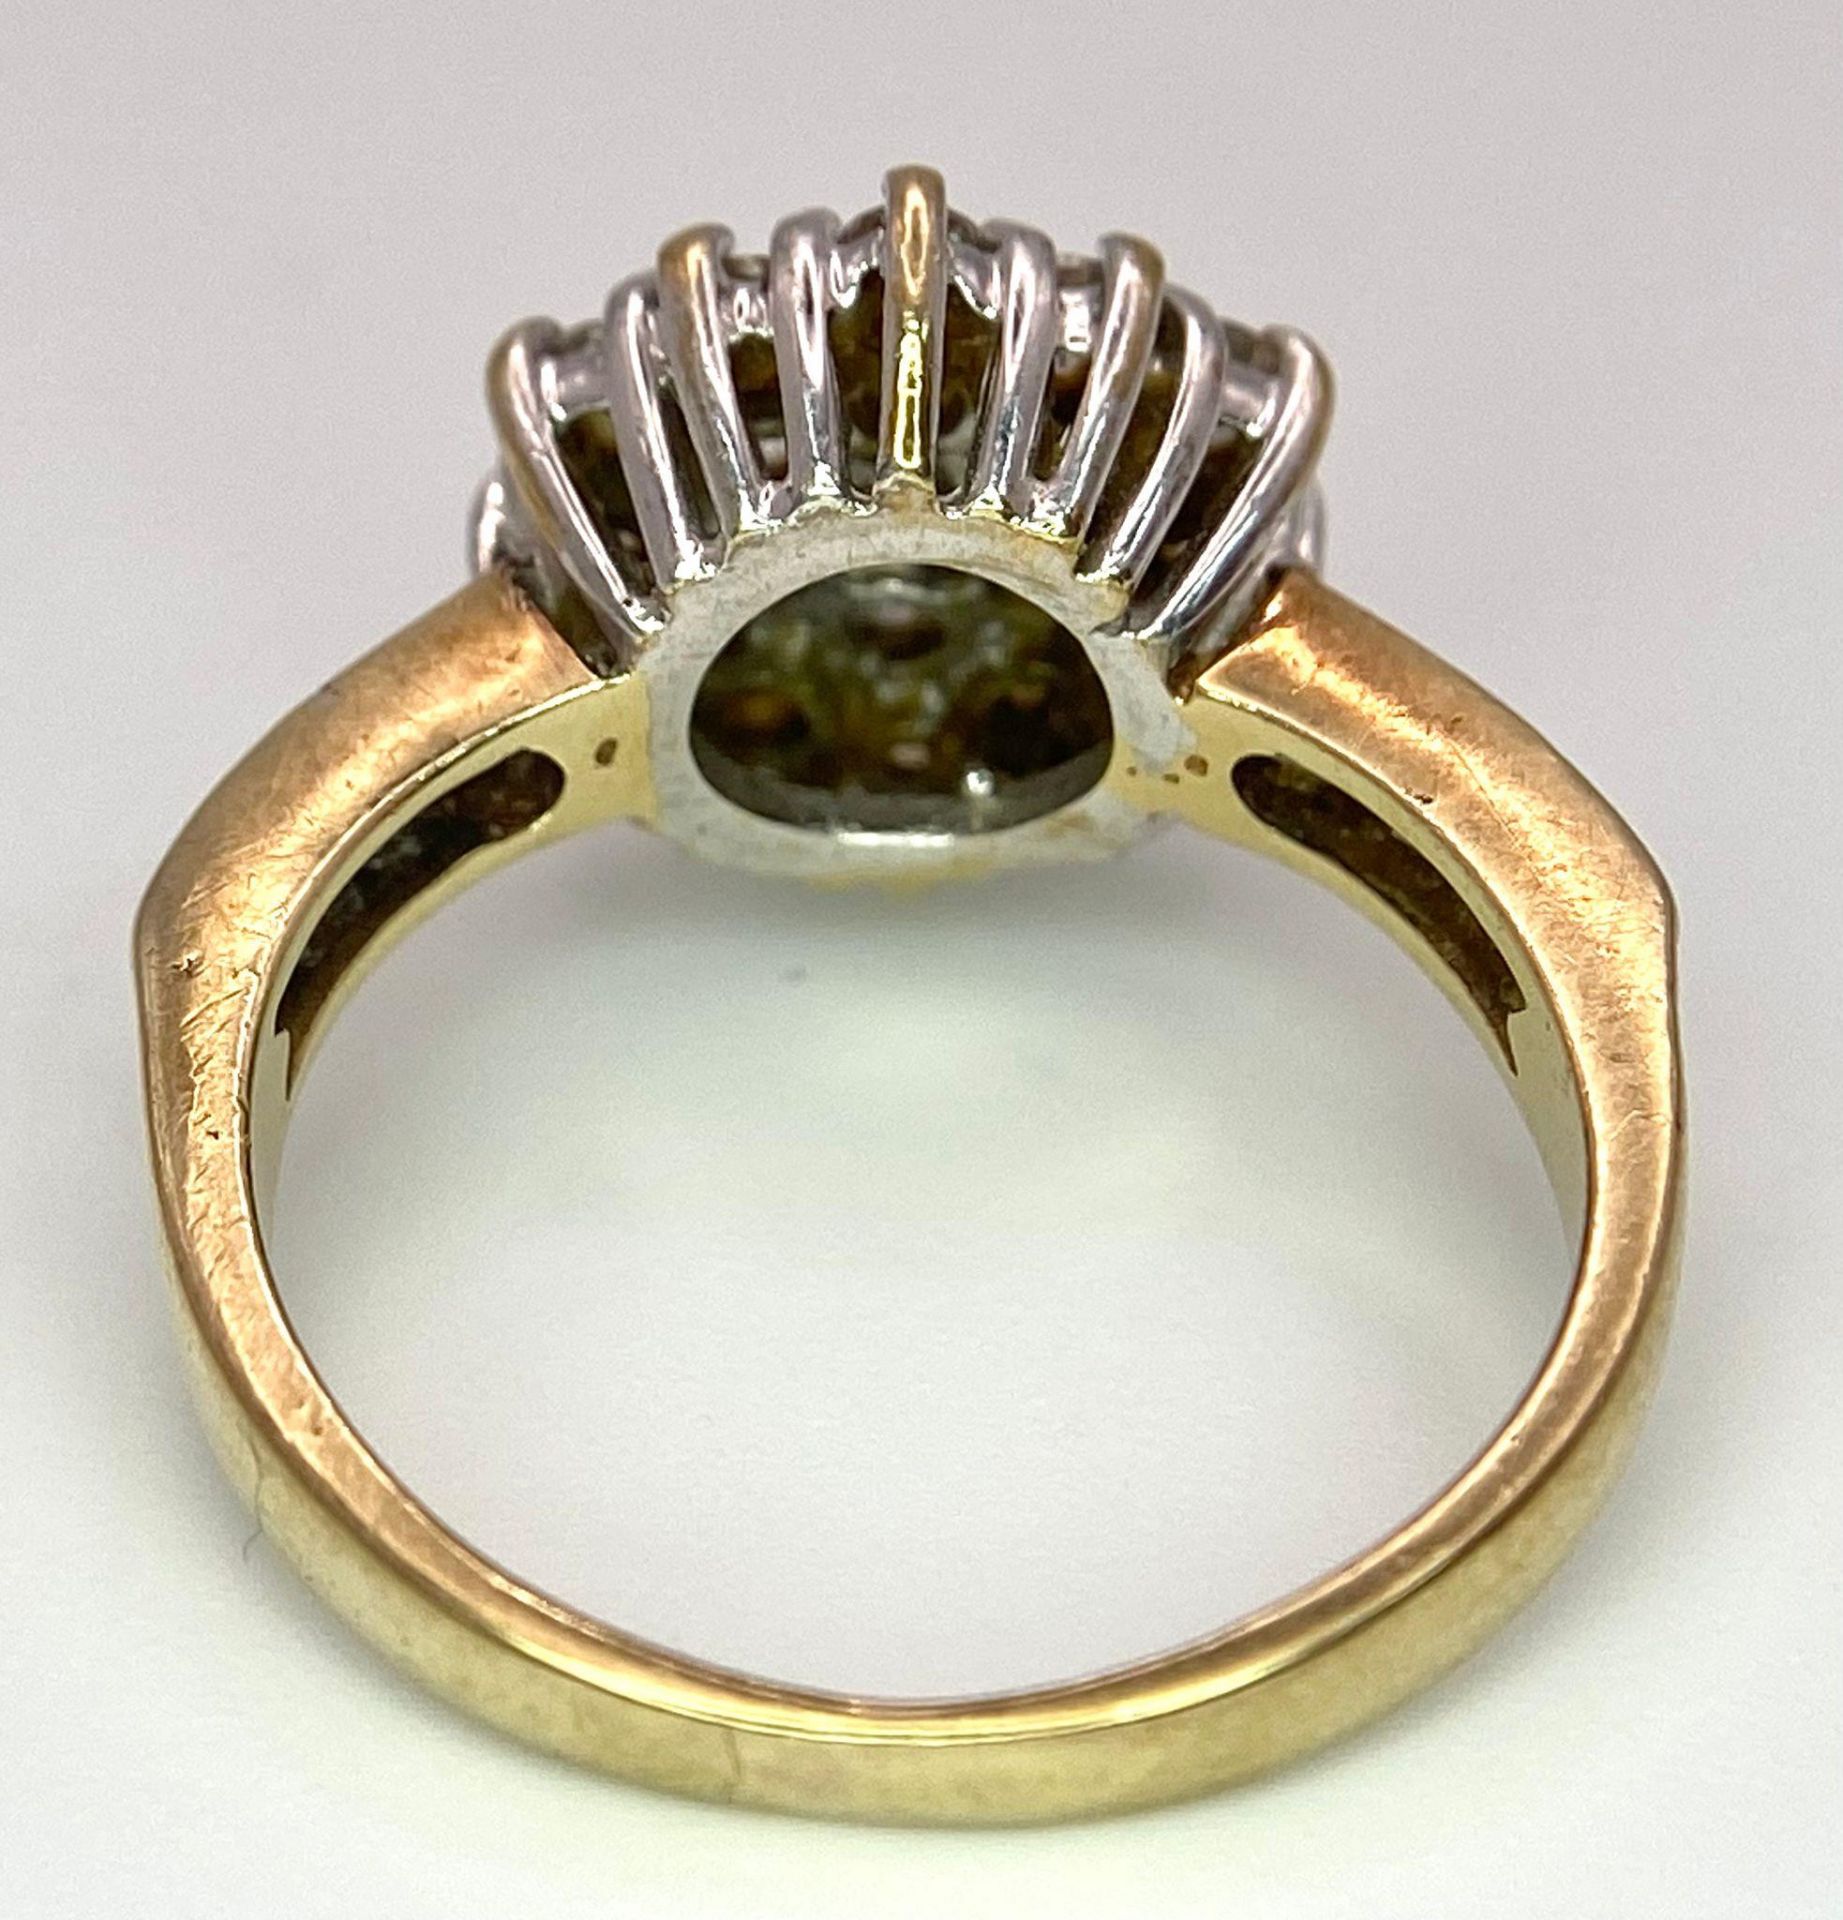 A 9K Yellow Gold CZ Flower Cluster Ring. Size I. 3.1g total weight. - Image 6 of 8